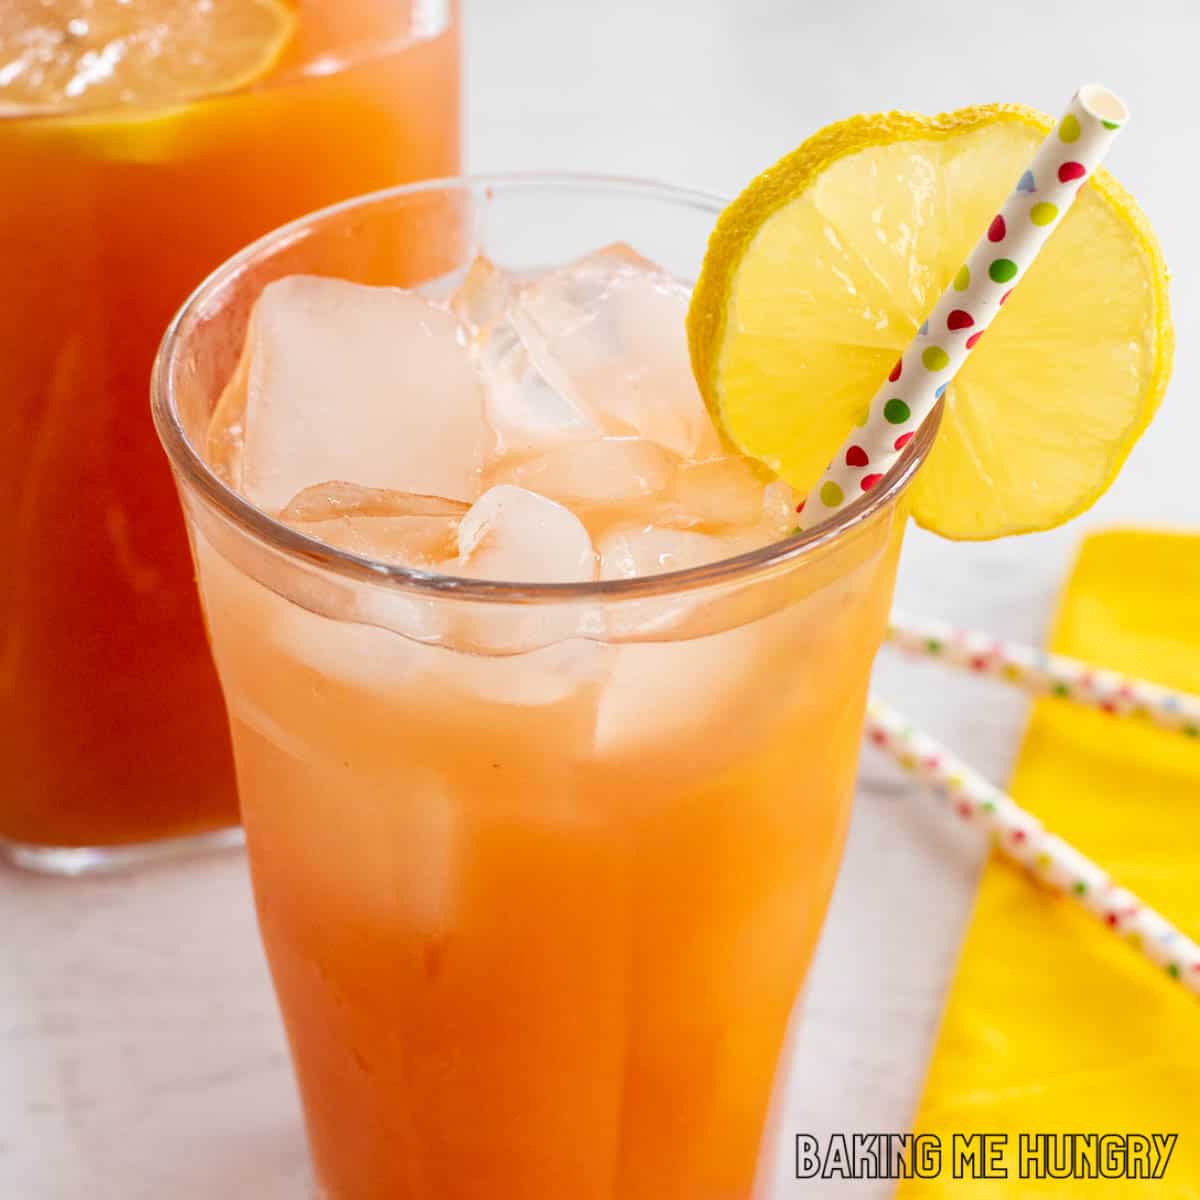 iced guava white tea lemonade recipe served in a glass with a straw and slice of lemon